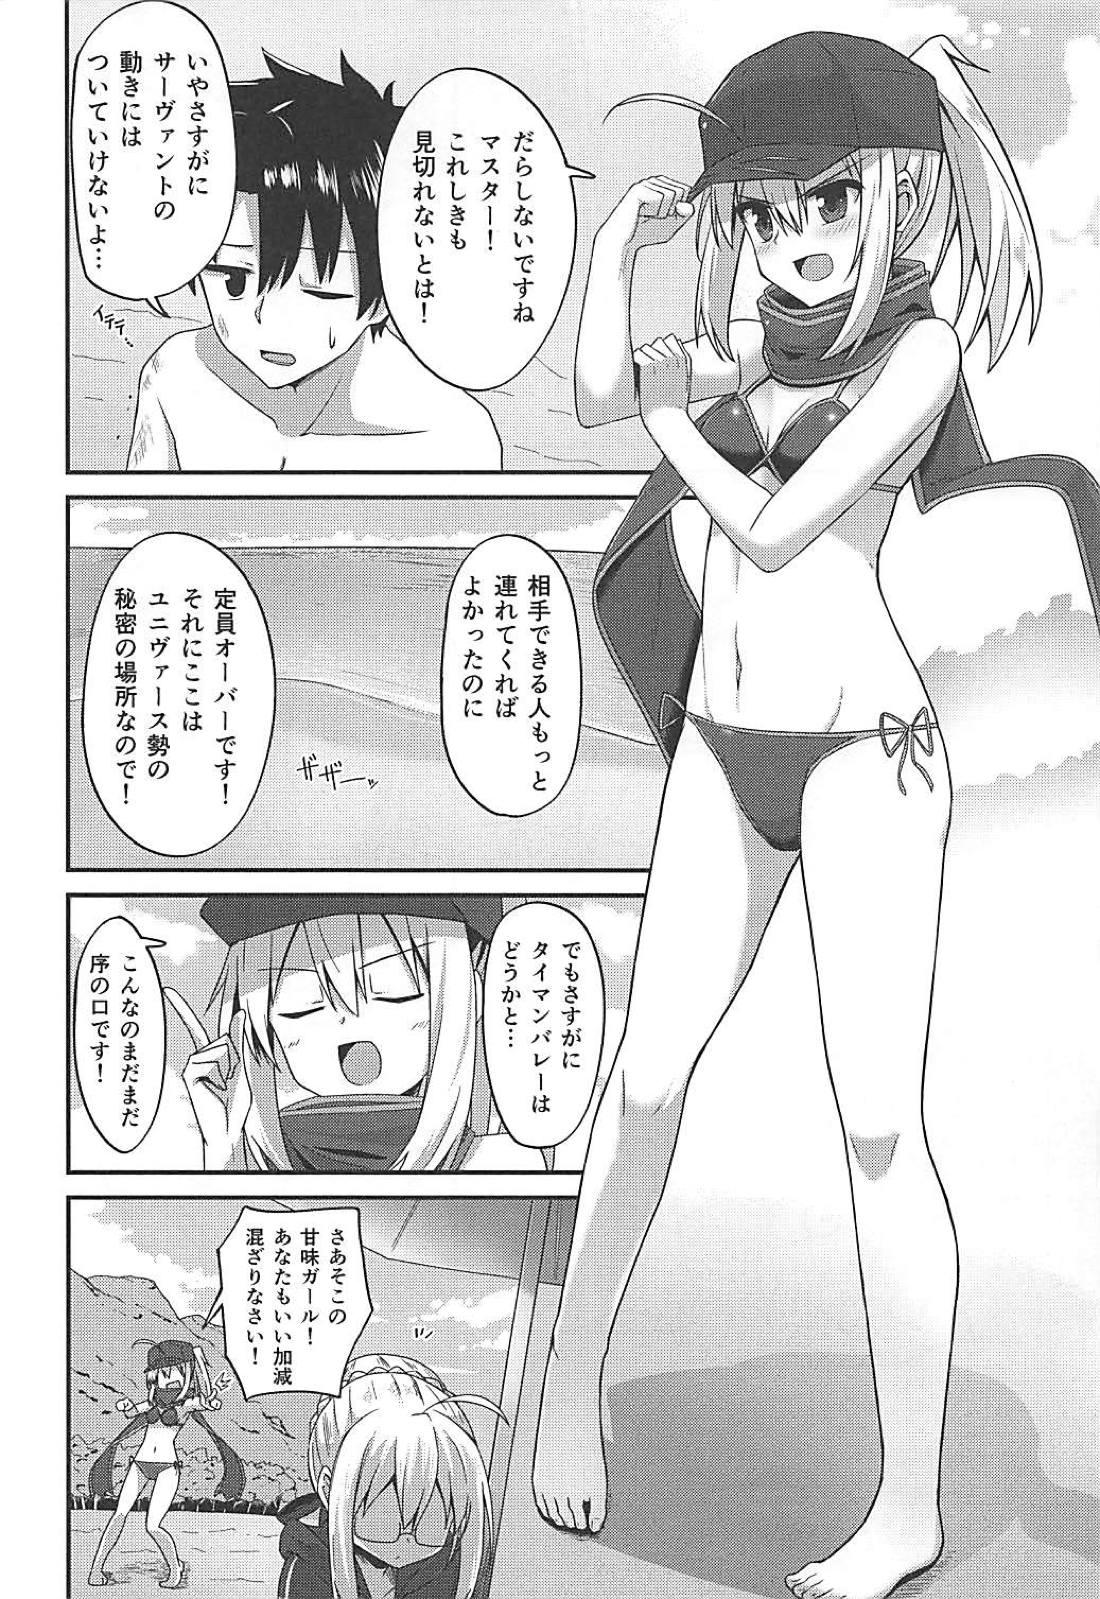 Hood Summer Heroines - Fate grand order Pregnant - Page 5